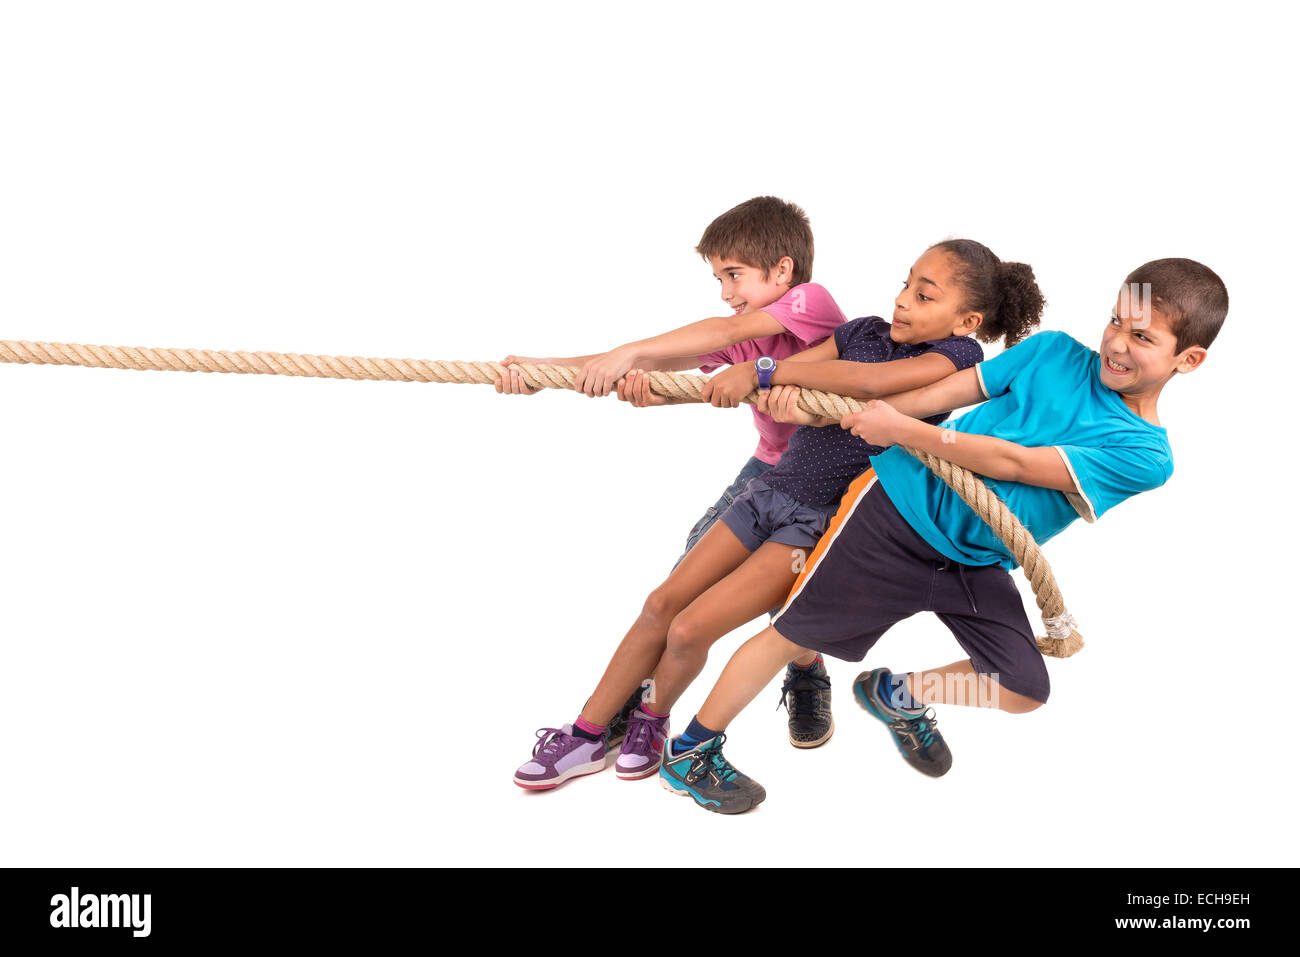 https://c8.alamy.com/comp/ECH9EH/group-of-children-in-a-rope-pulling-contest-ECH9EH.jpg